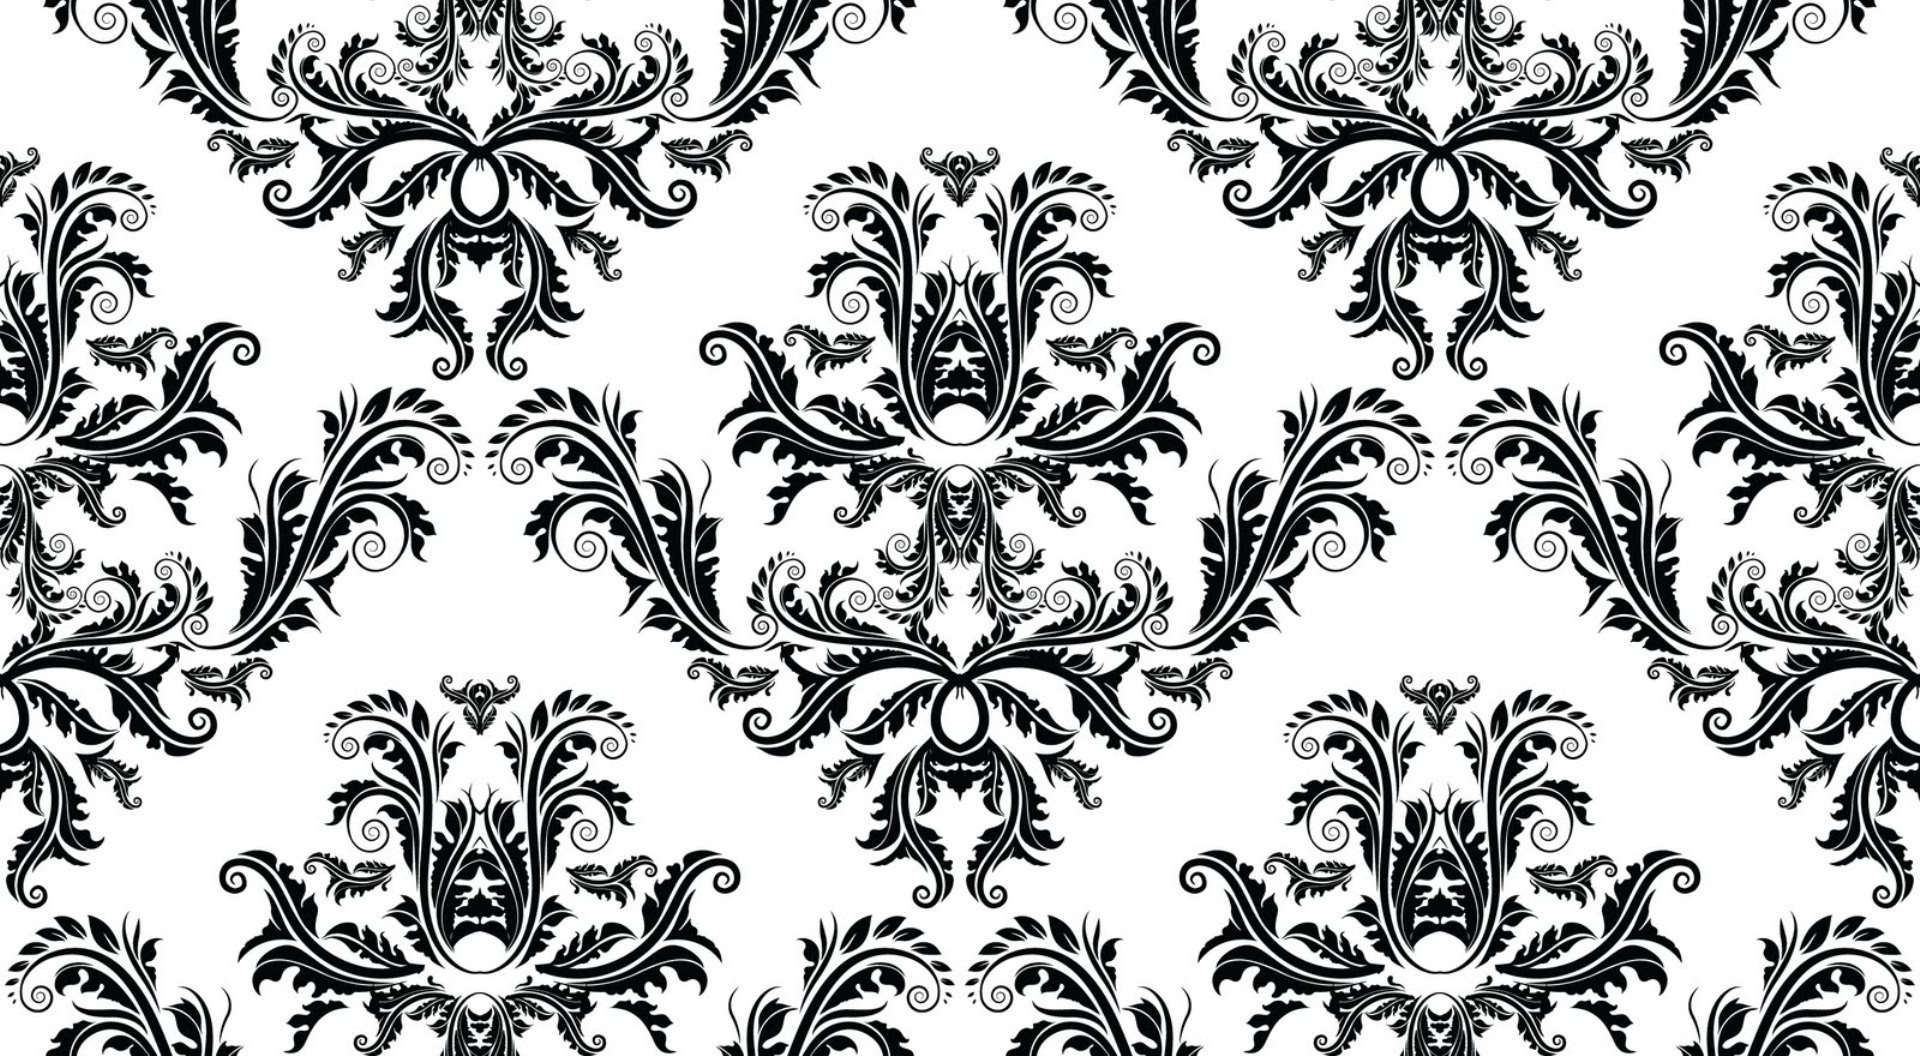 Patterns Black and White Black and White Pattern Backgrounds